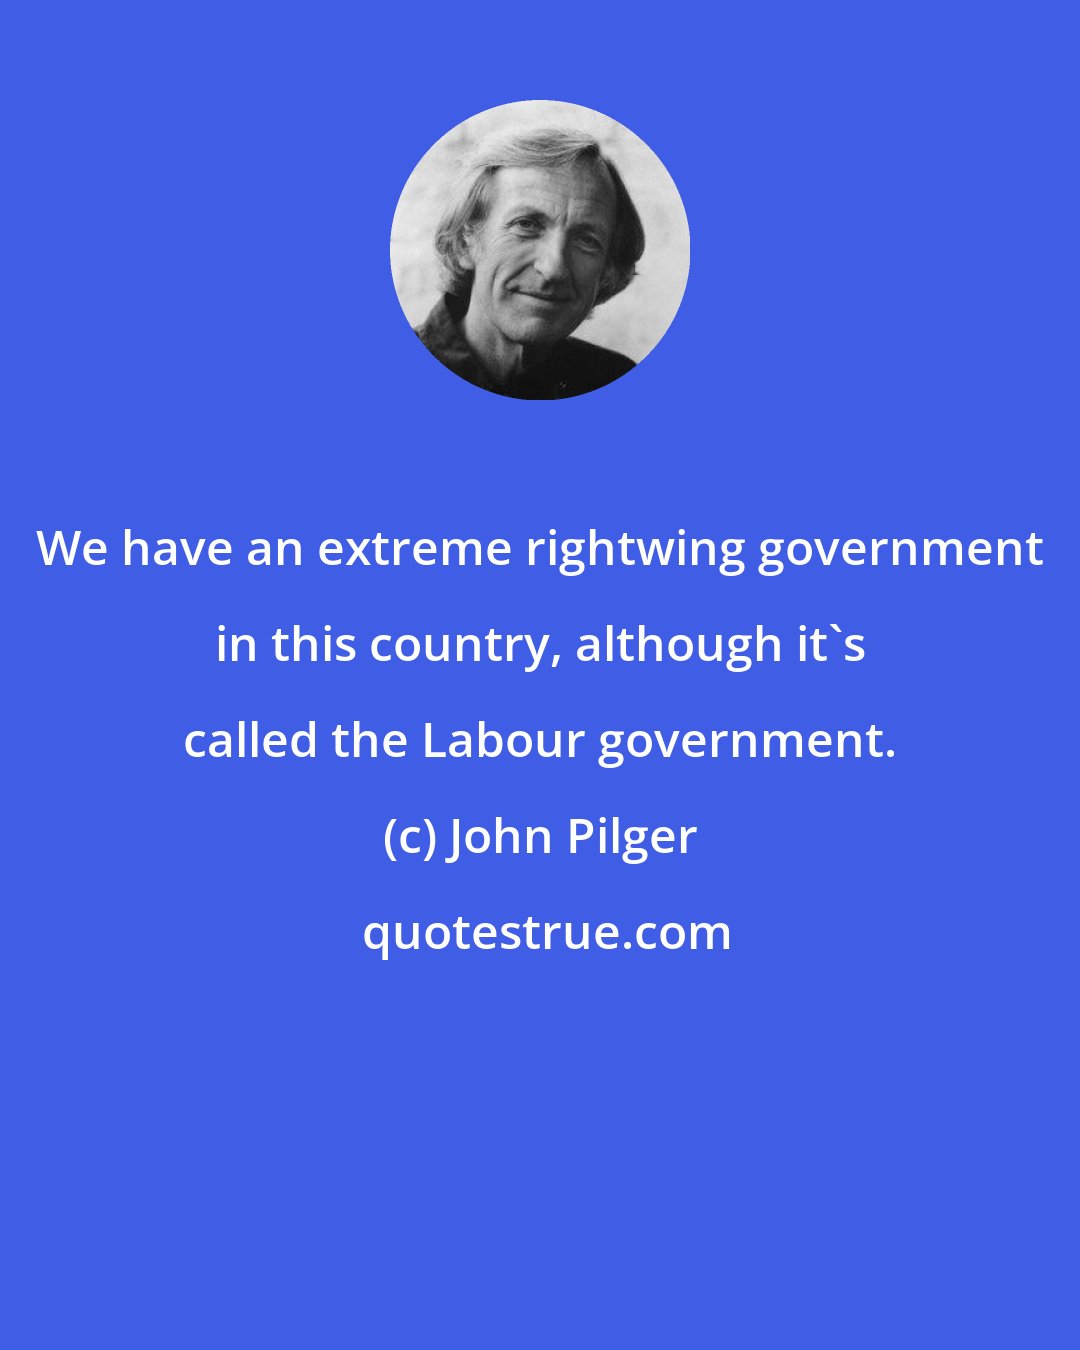 John Pilger: We have an extreme rightwing government in this country, although it's called the Labour government.